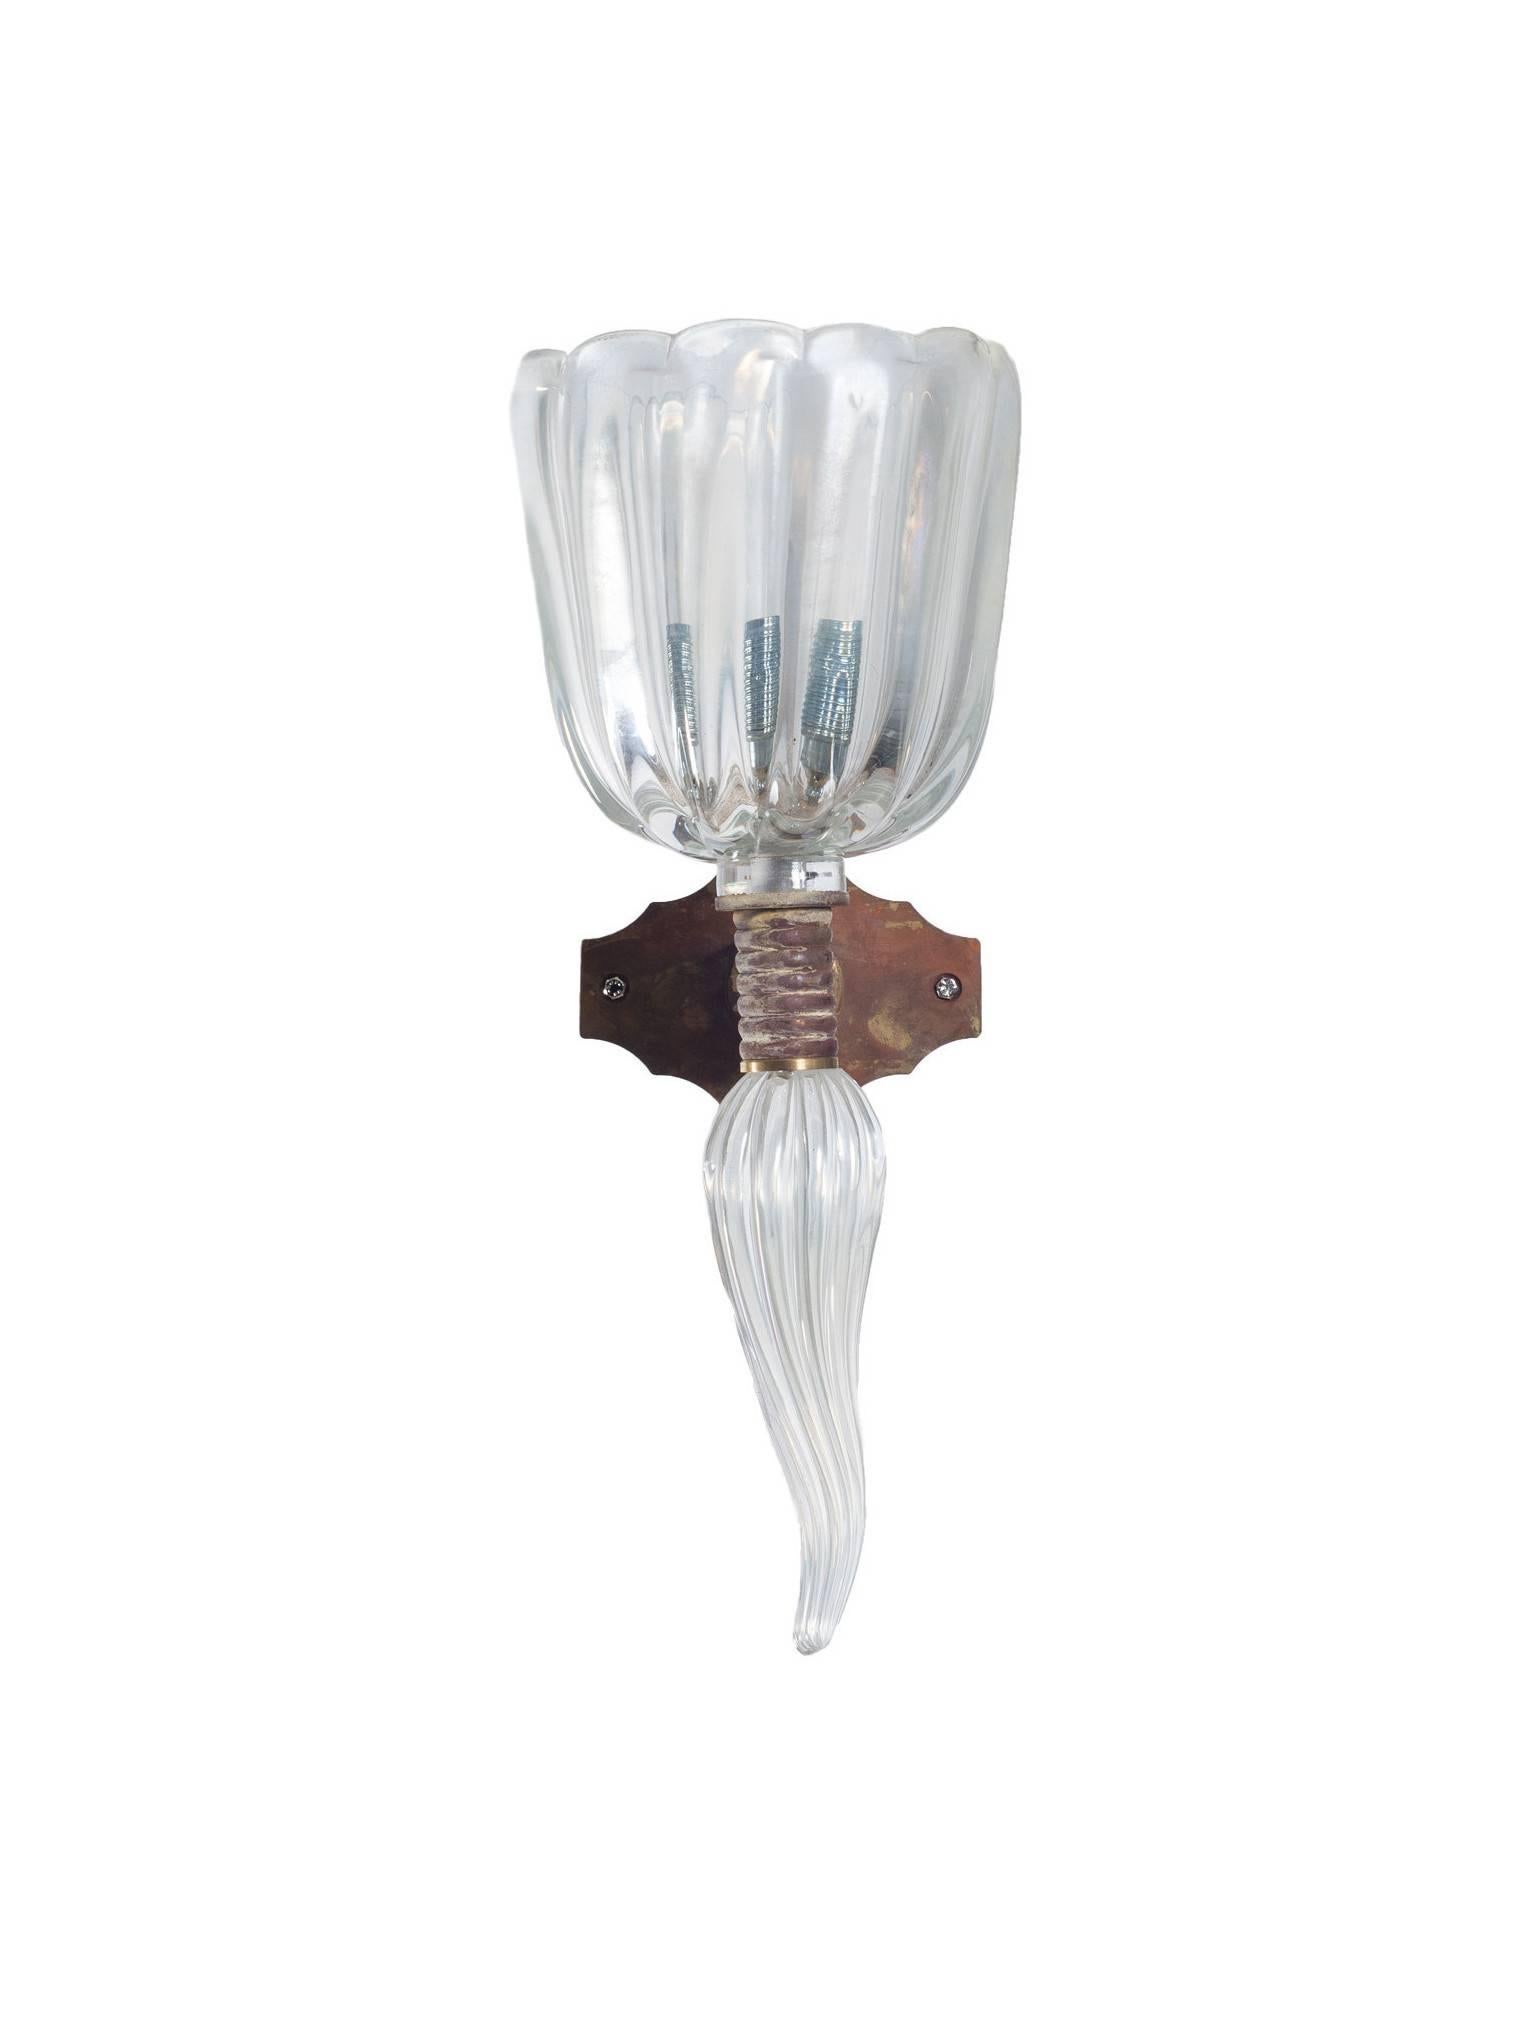 Italian Venetian sconces, blown Murano glass, iridescent and transparent, Seguso, 1960s.
This is a pair of amazing Italian sconces, attributed to Seguso and dated 1960s, composed by an elegant glass cup, decorated at the bottom by a glass flame,